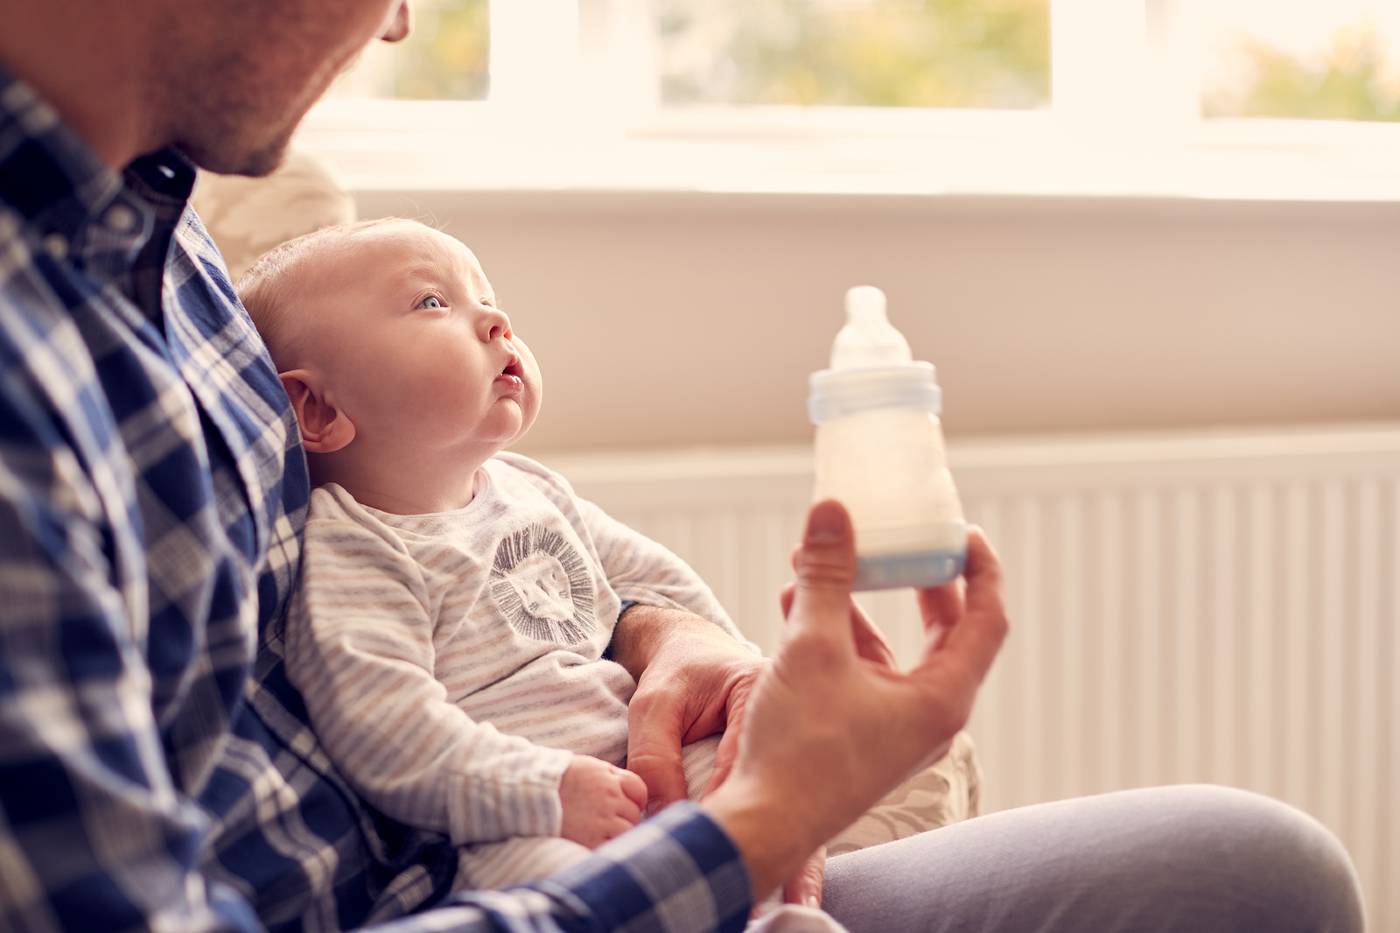 Parent's Choice Formulas: What's The Best Option For Your Baby